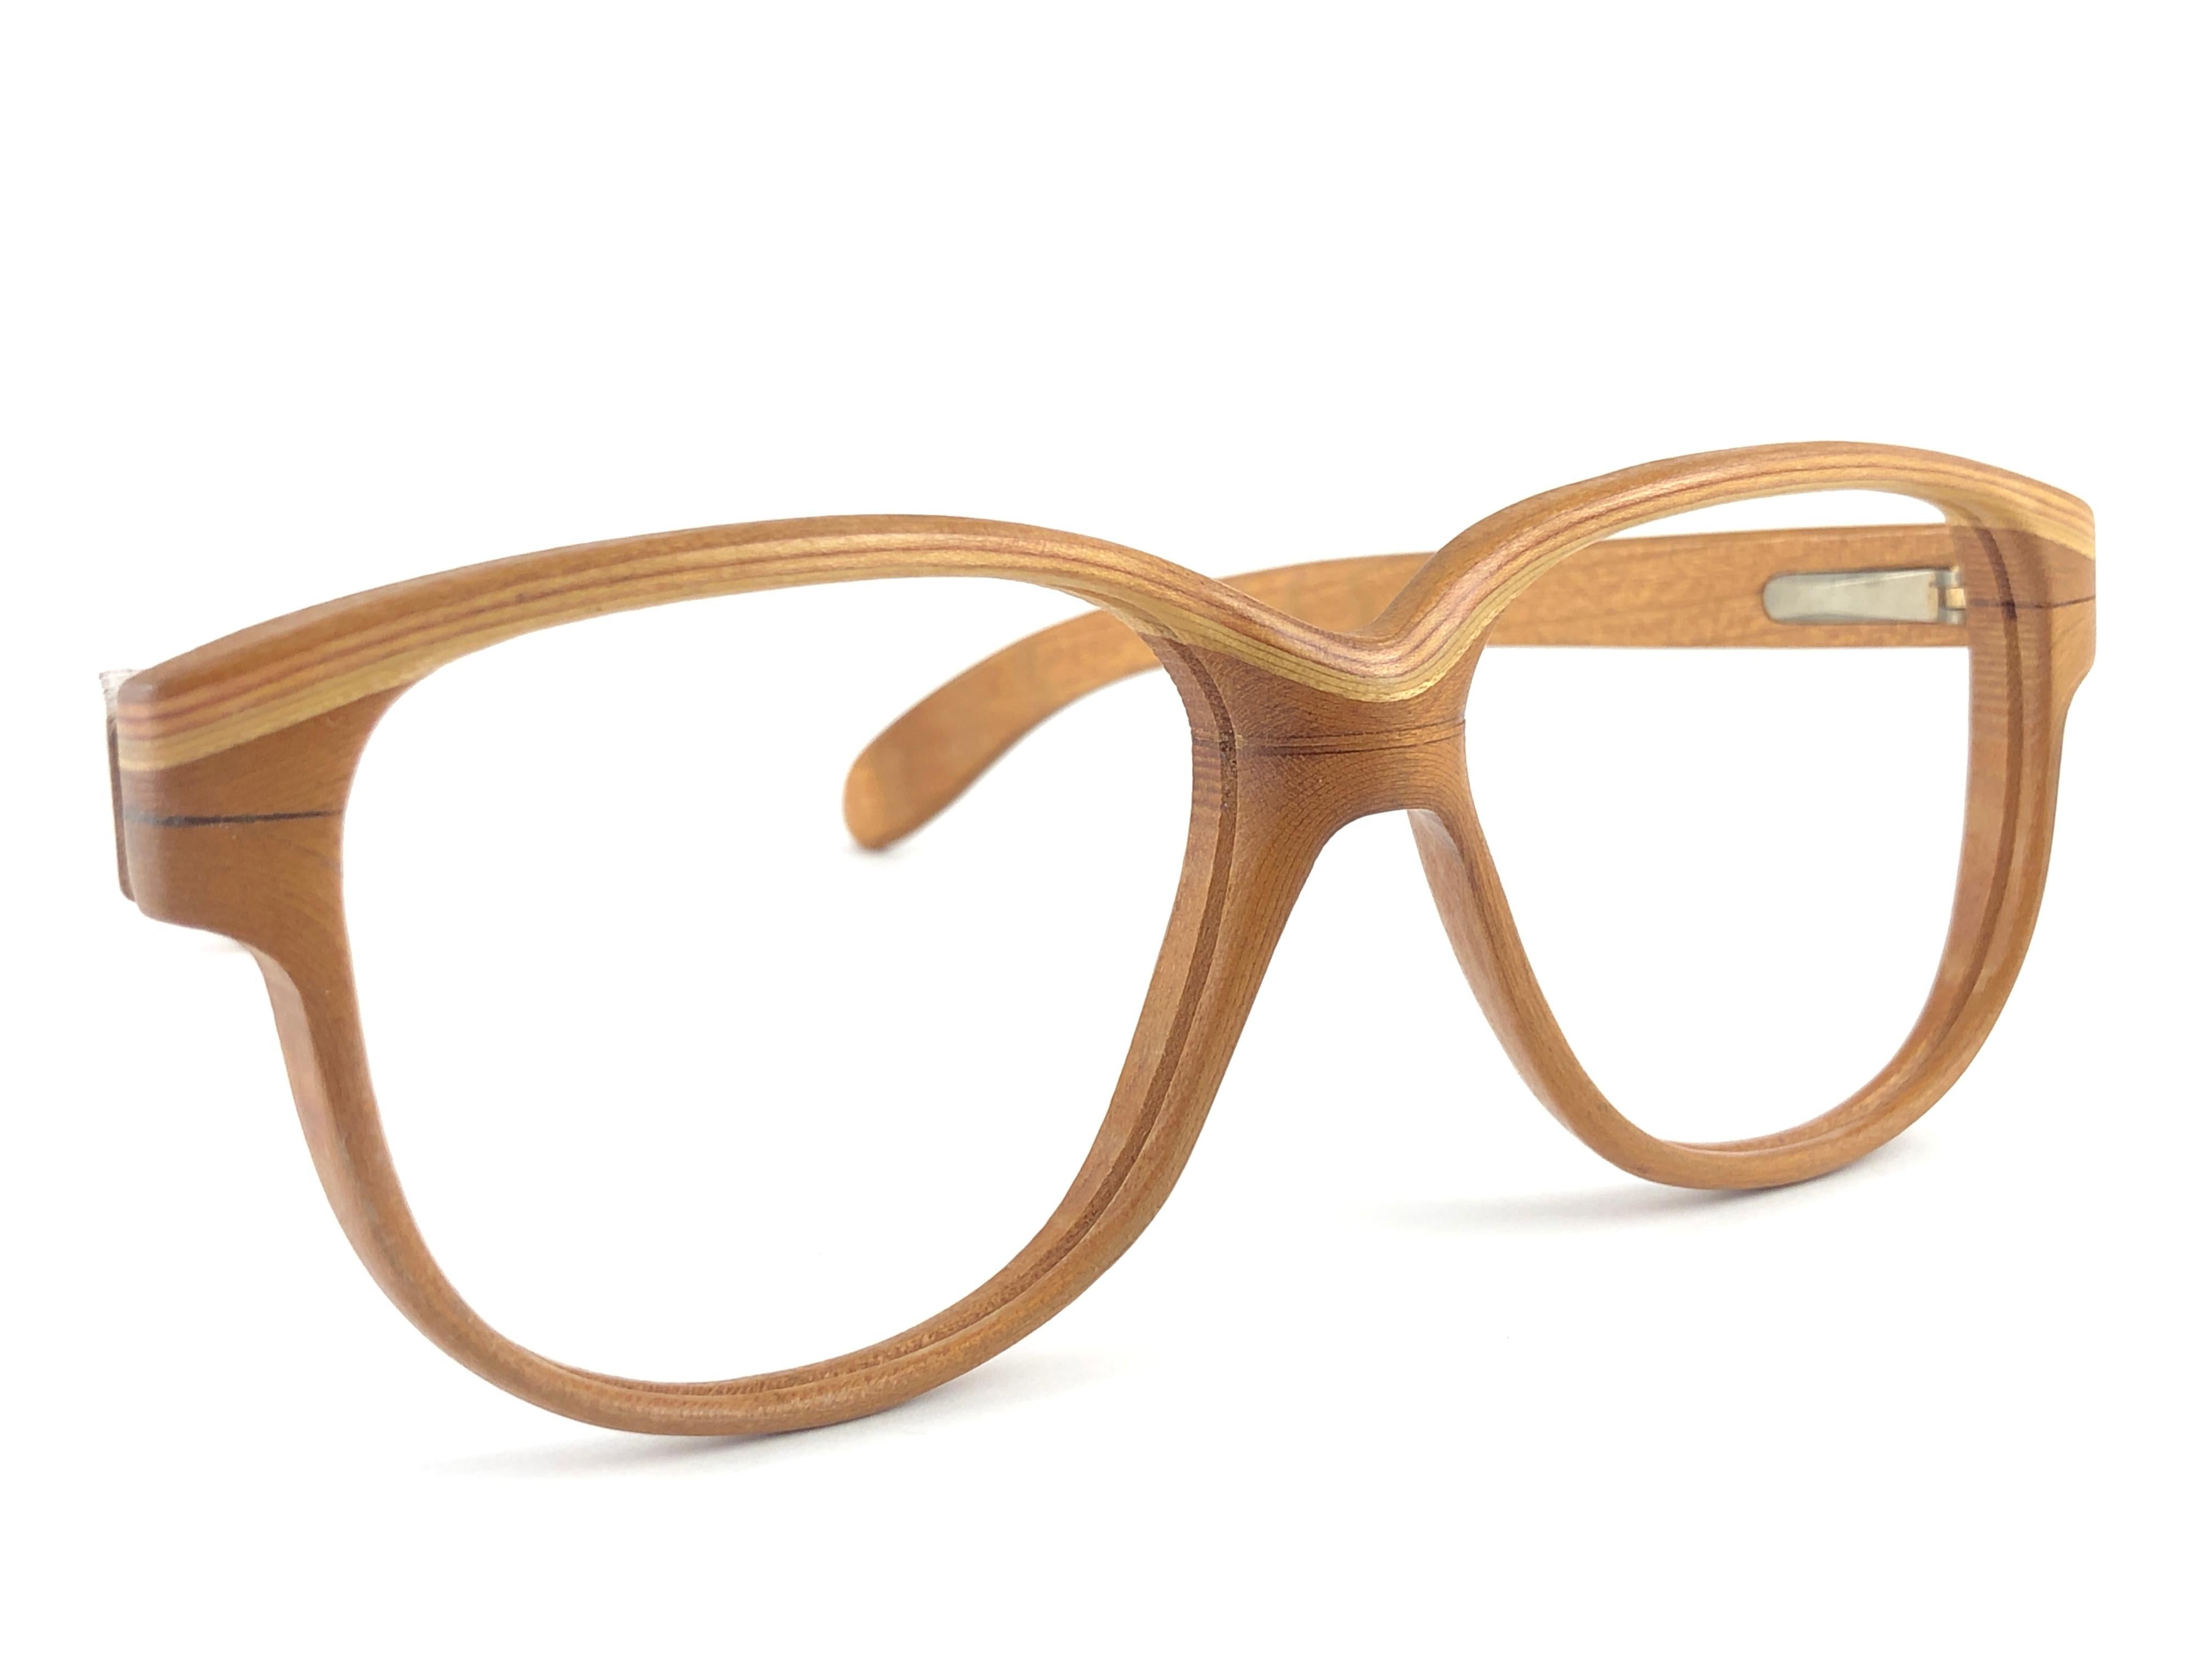 New Vintage Wood Look Paris genuine wood frame perfect for any prescription lenses, also great pair to wear as a sunglasses. 
The spring hinge makes them very confortable to wear.

New, never worn or displayed. This pair may have minor sign of wear